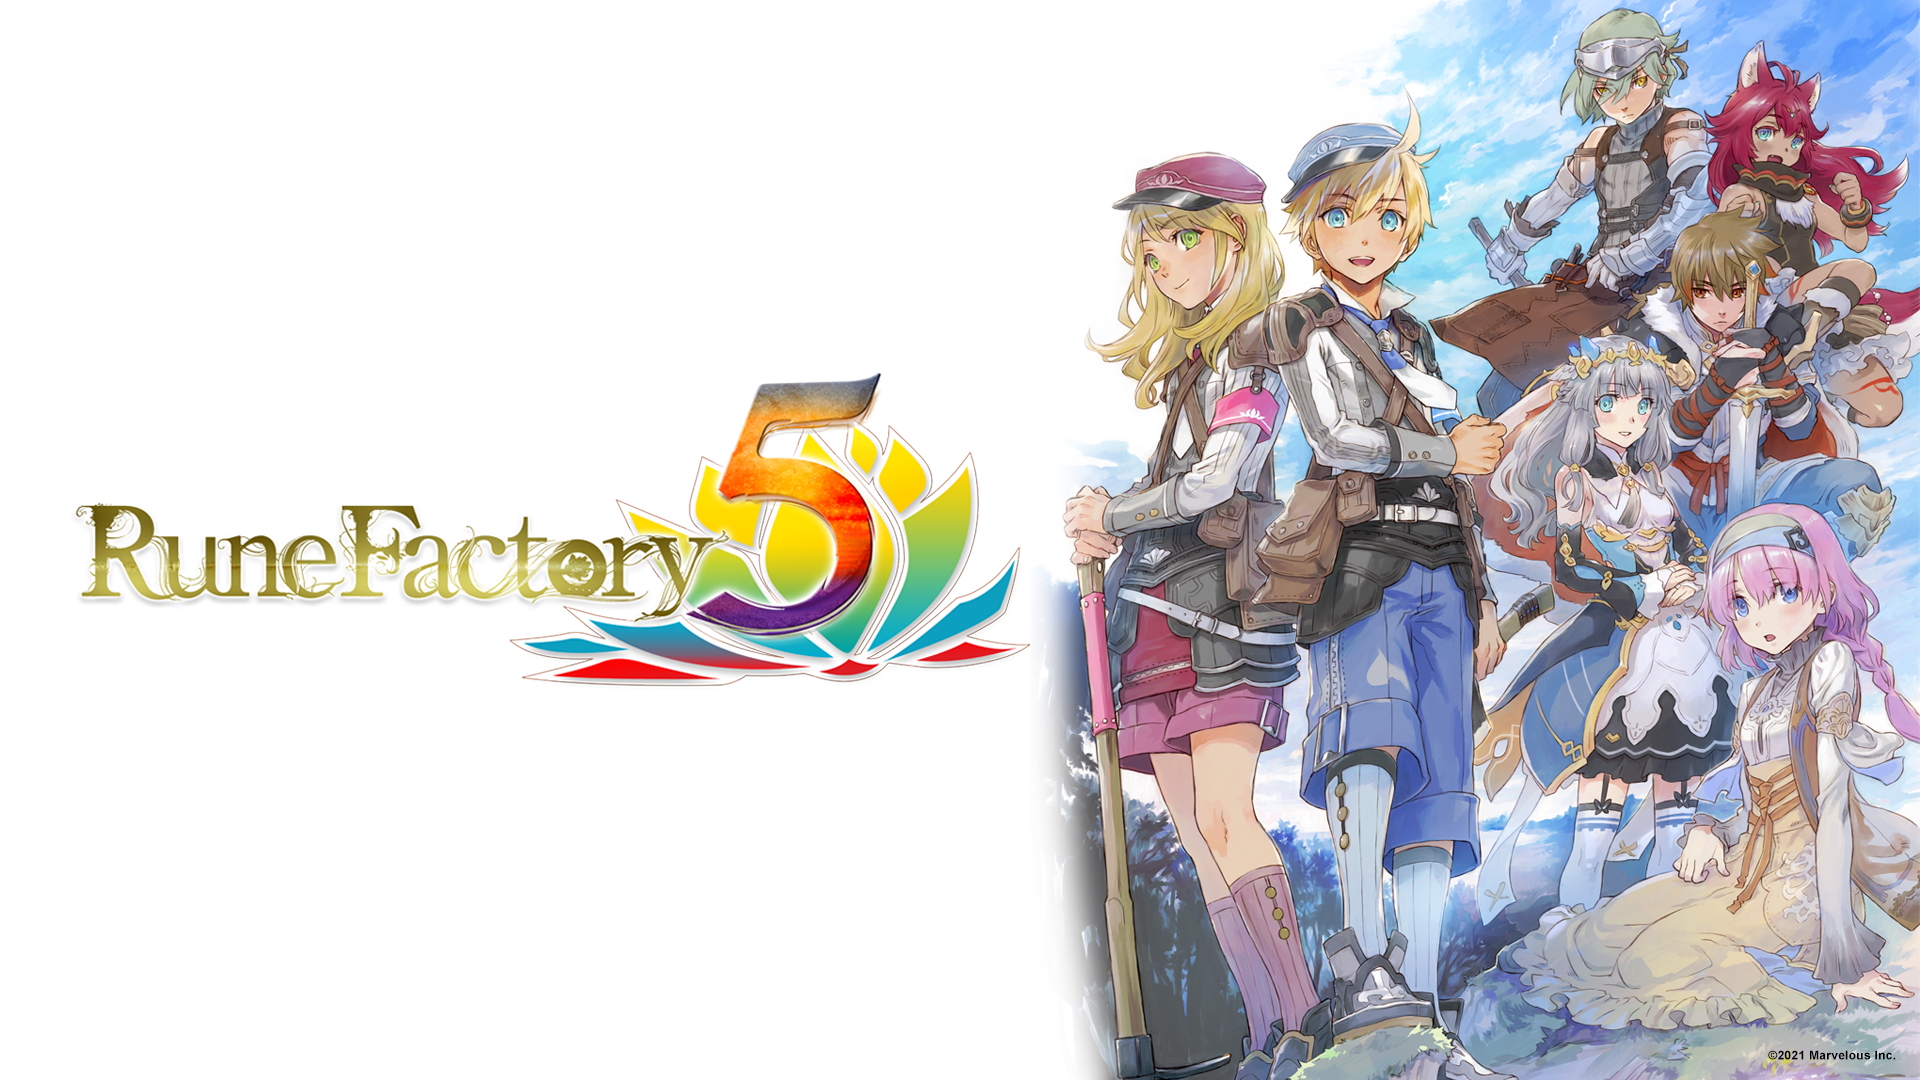 Rune Factory 5 is now available for PC